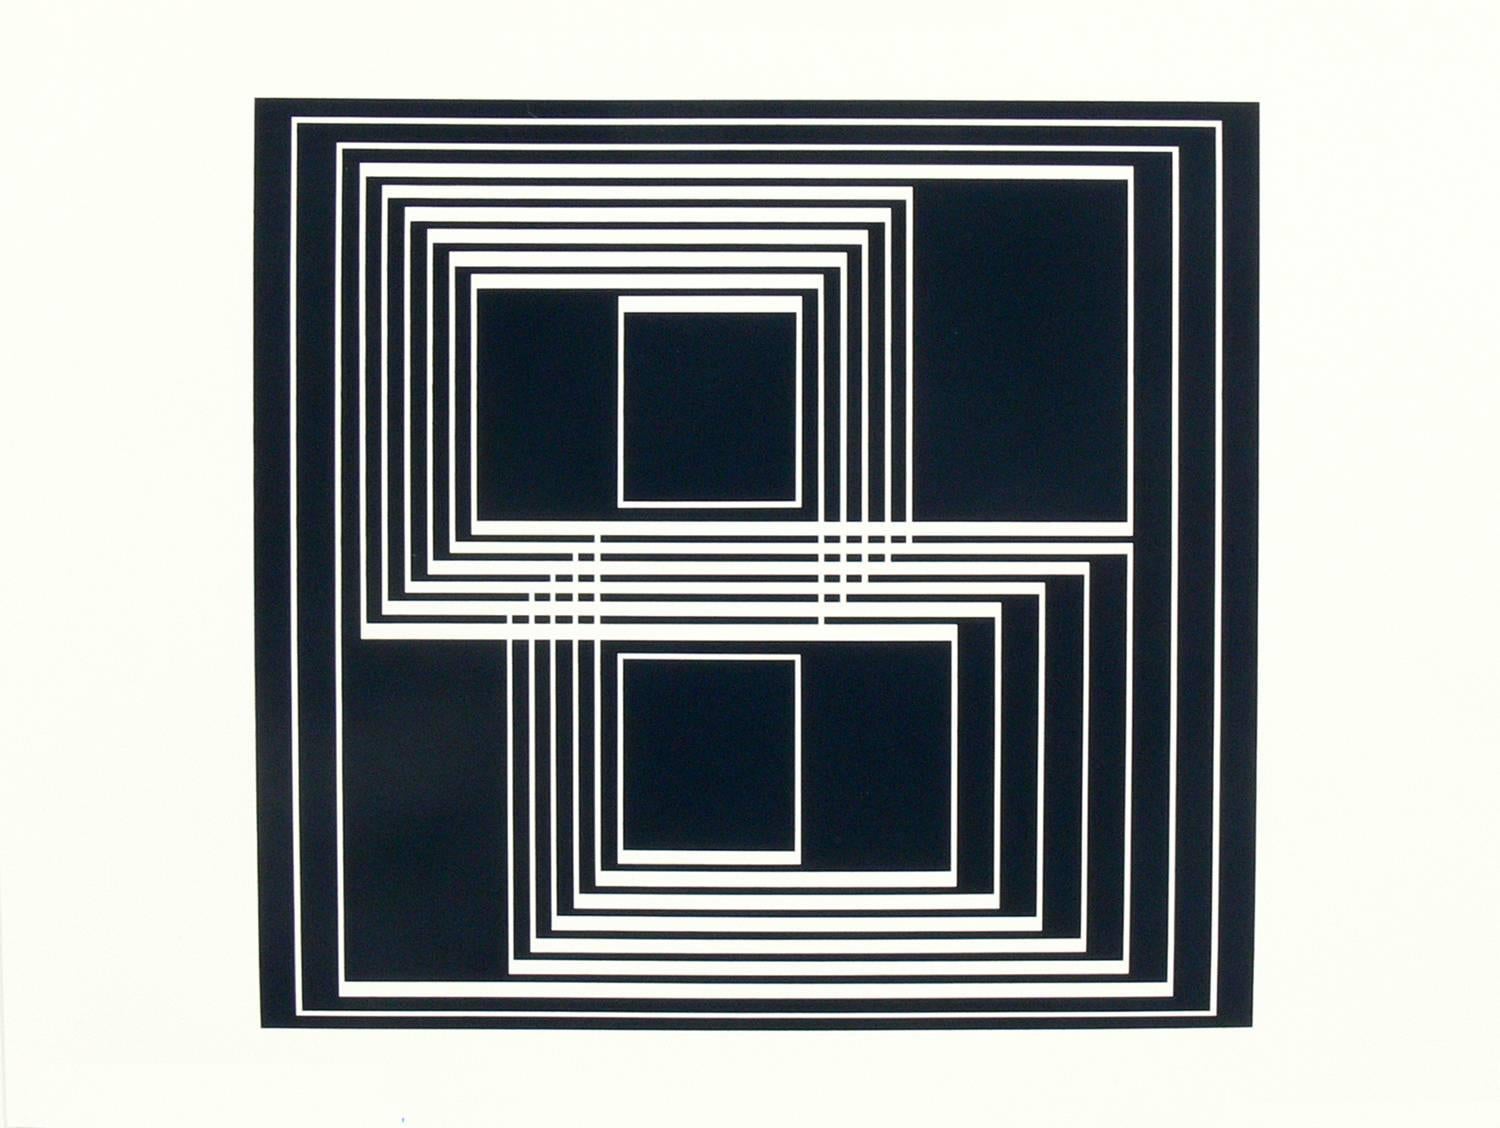 Josef Albers abstract lithograph from formulation and articulation, published by Harry N. Abrams Inc., New York, and Ives Sillman Inc., New Haven, circa 1972. This work is from portfolio I, folder 33. It has been framed in a clean lined black